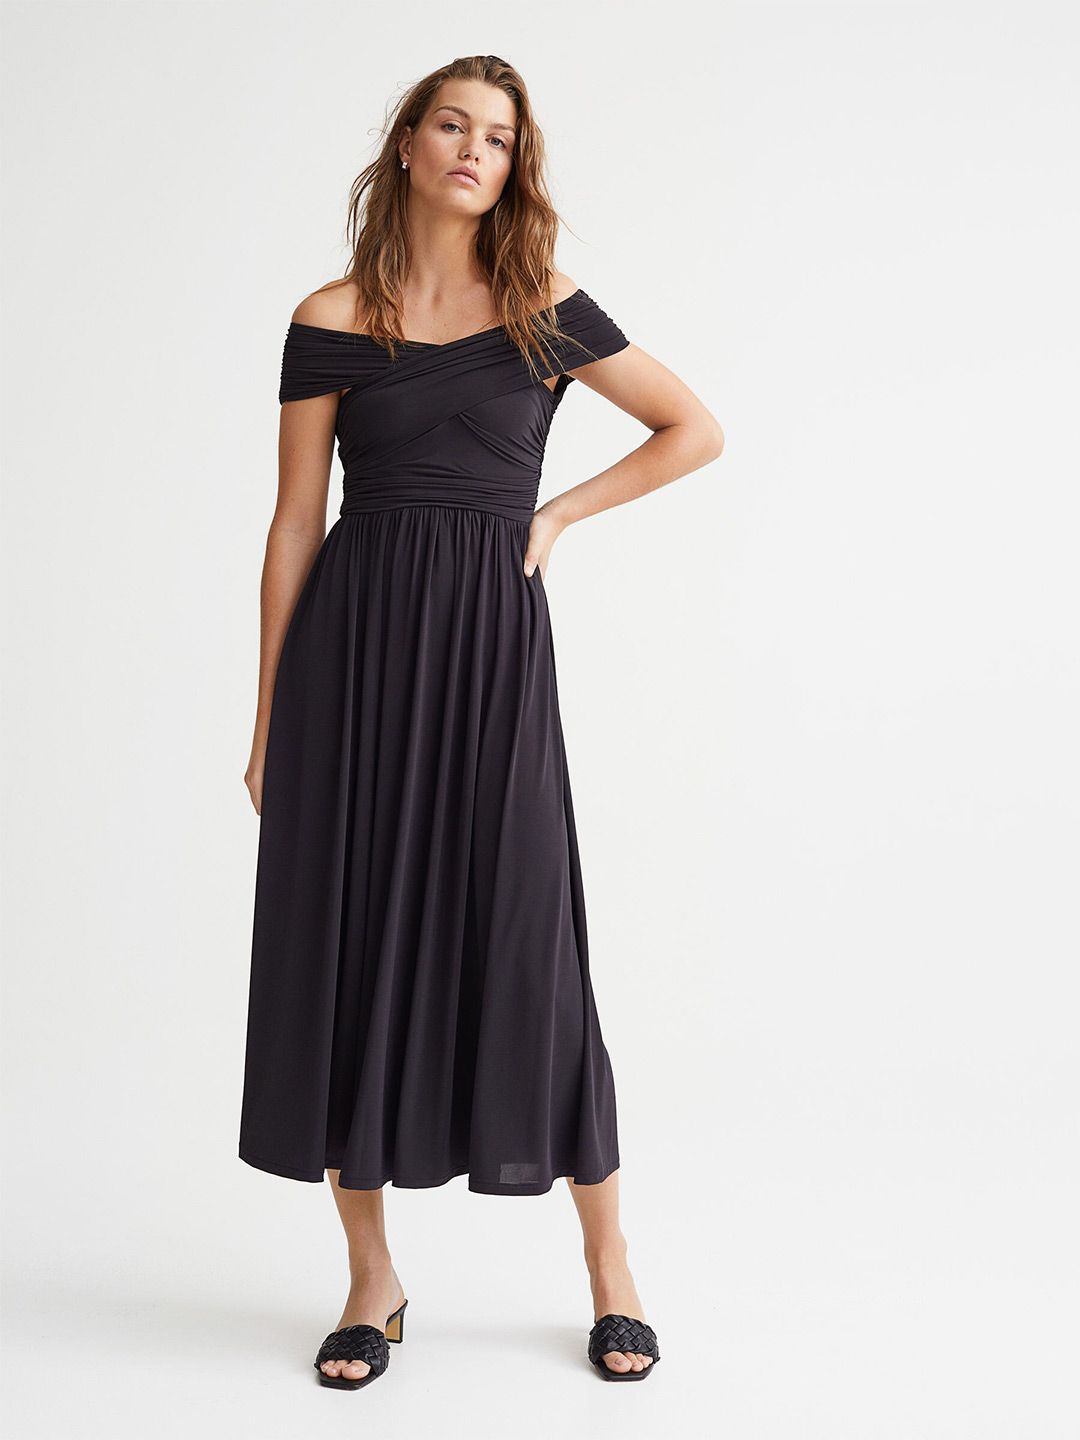 H&M Black Draped Off-The-Shoulder Dress Price in India